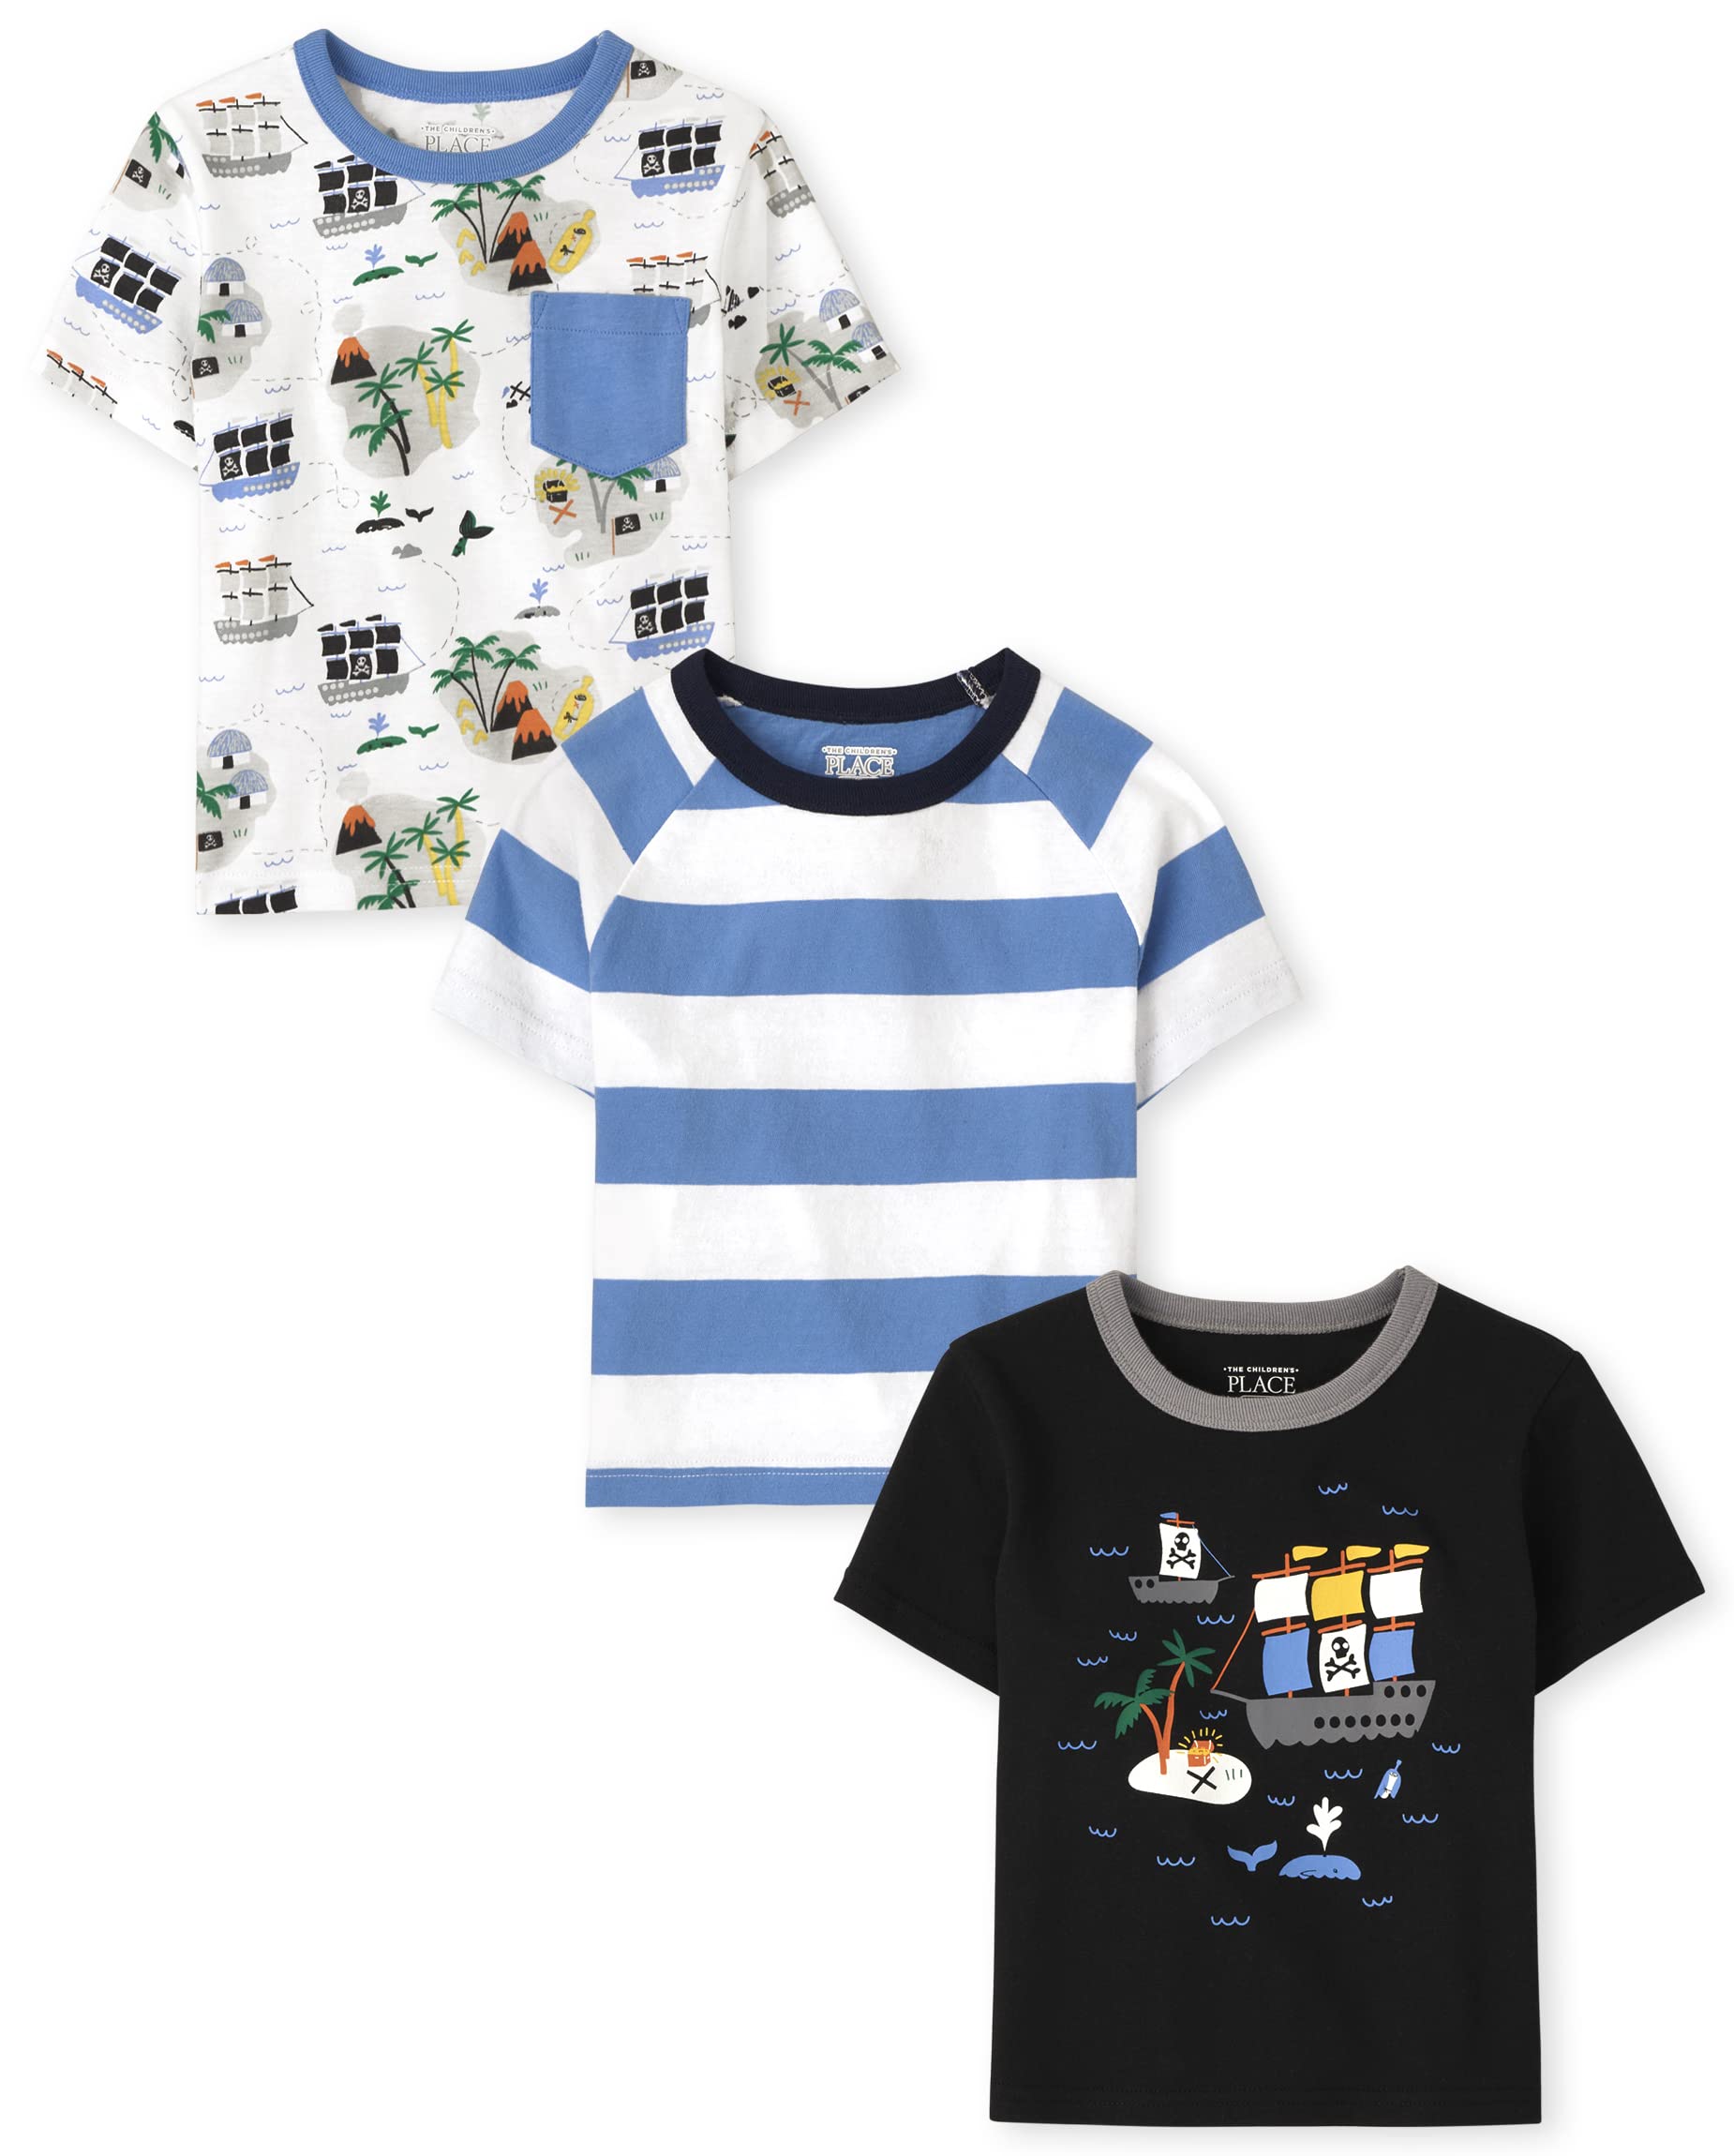 The Children's Place Baby Toddler Boys Short Sleeve Fashion Top